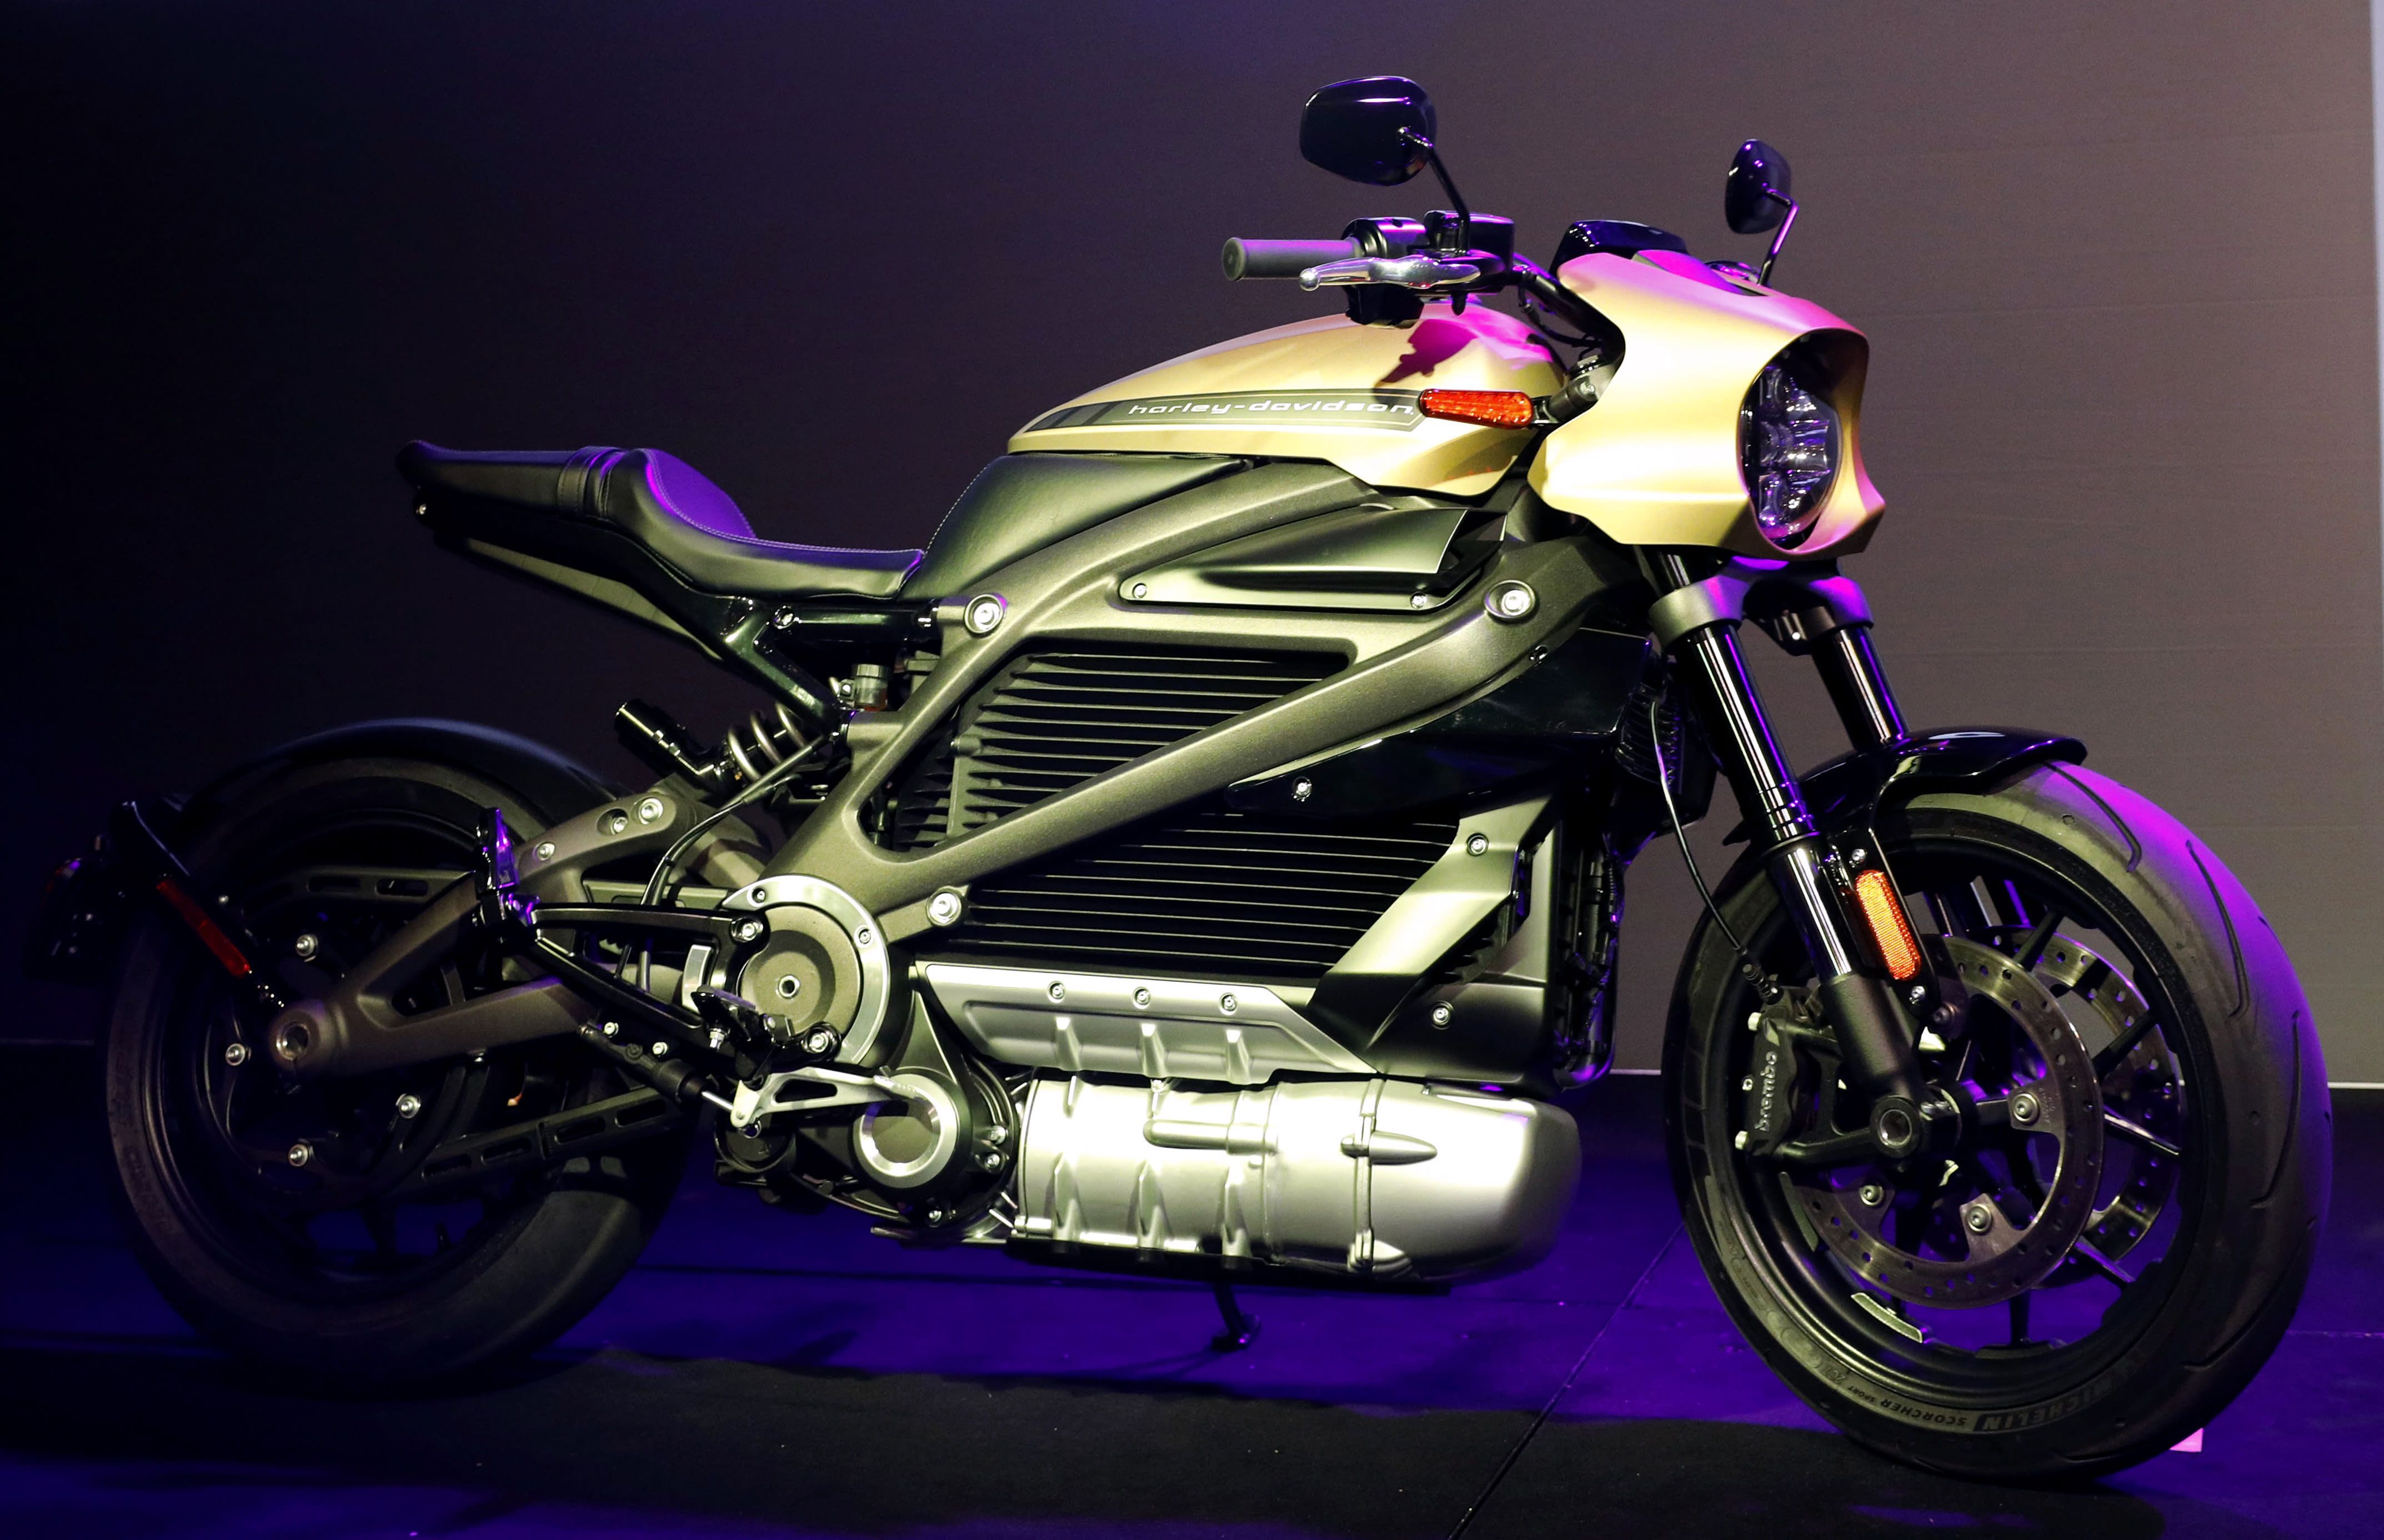 HarleyDavidson's electric Hog 0 to 60 mph in 3 seconds